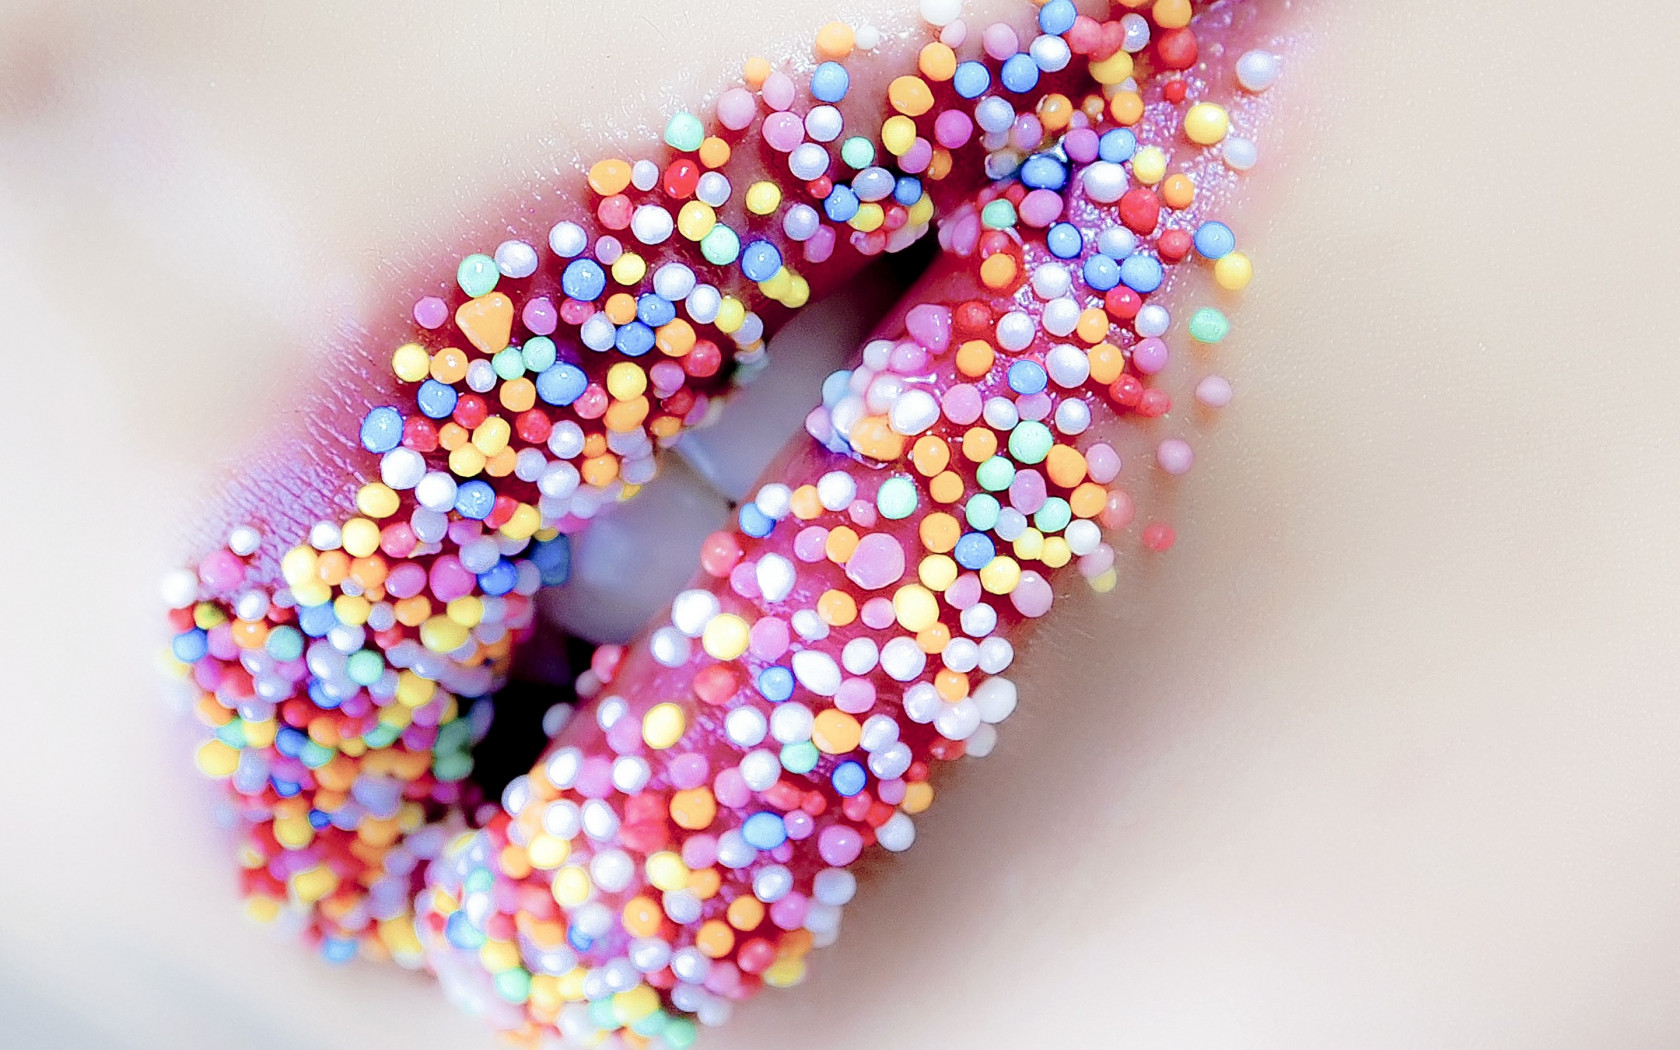 Lips with sweets wallpaper 1680x1050